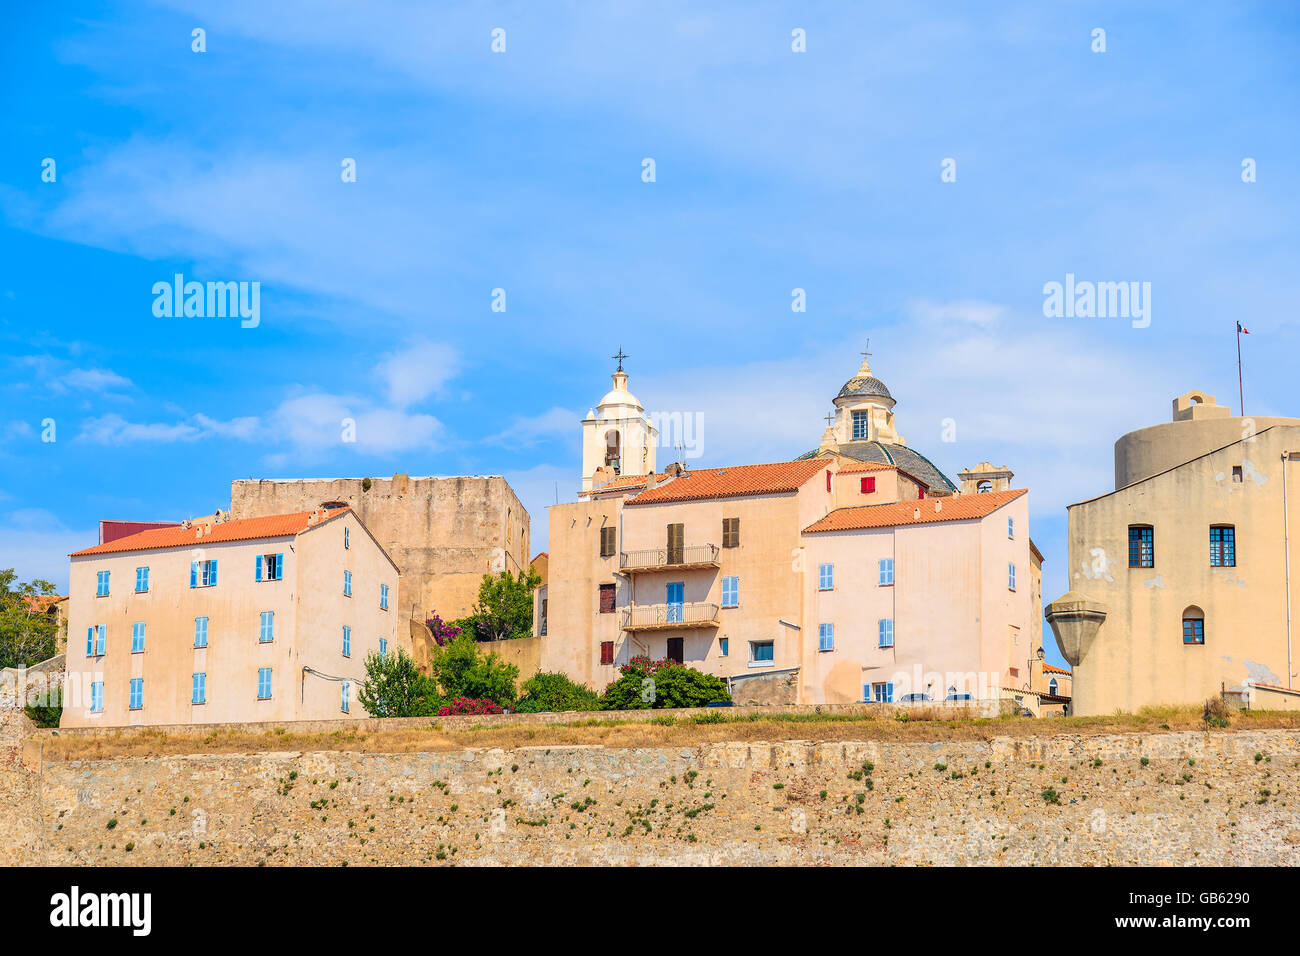 A view of Calvi old town and city walls, Corsica island, France Stock Photo